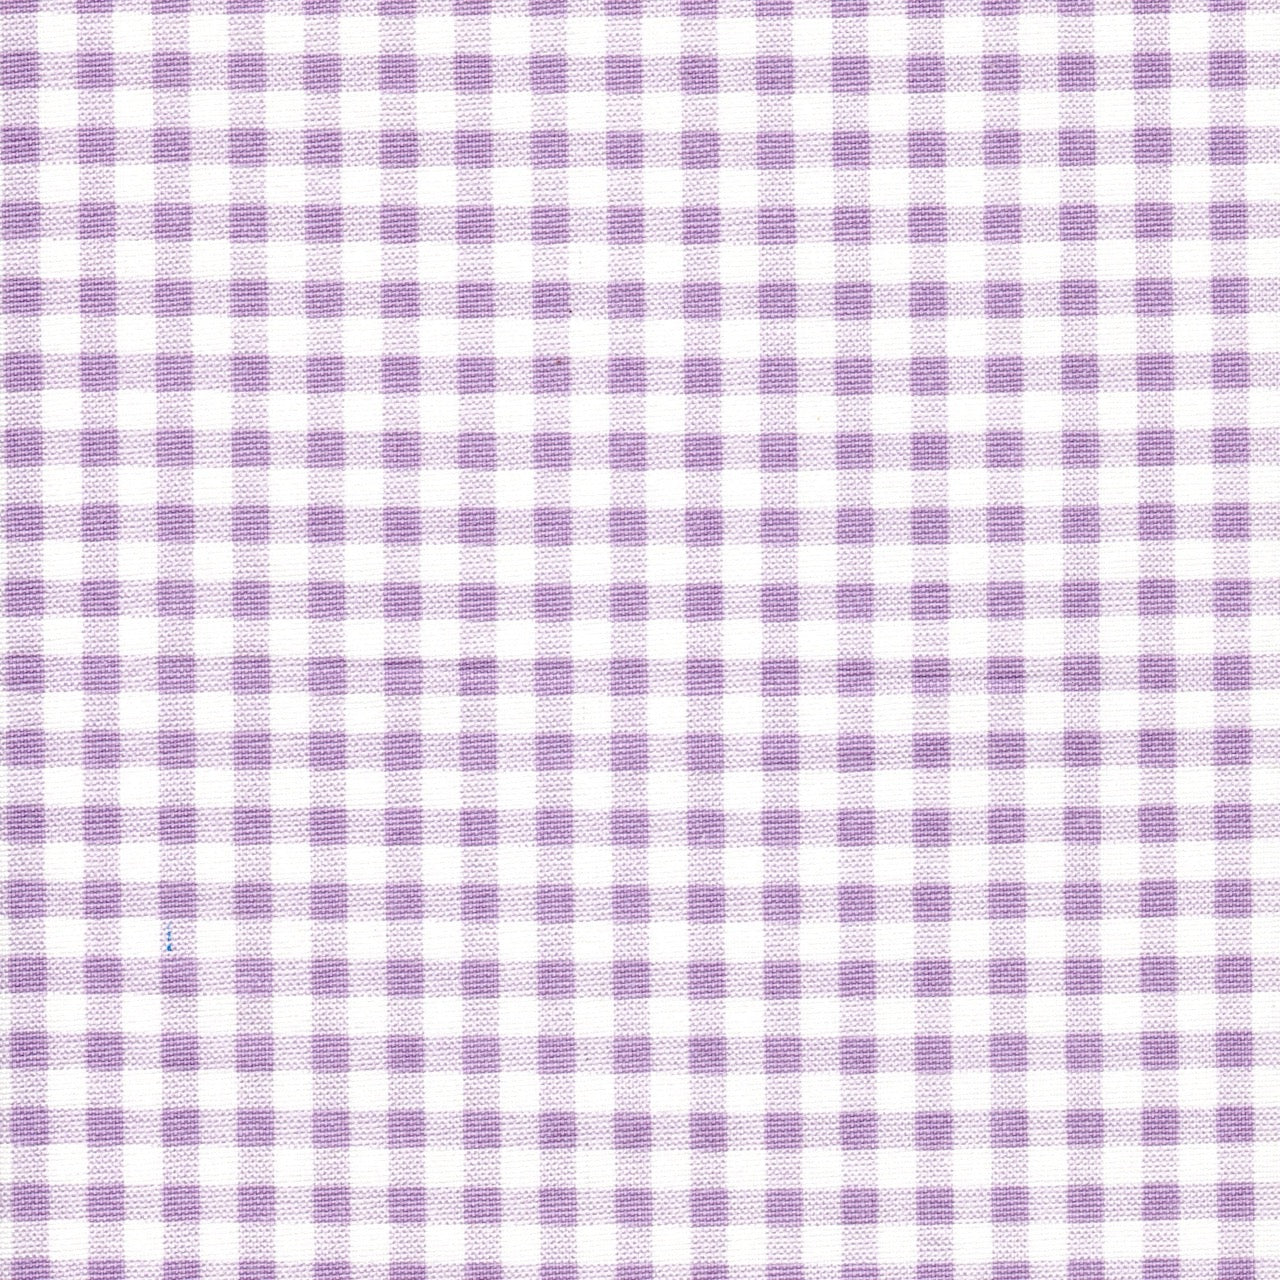 Tailored Crib Skirt in Orchid Large Gingham Check on White Plaid